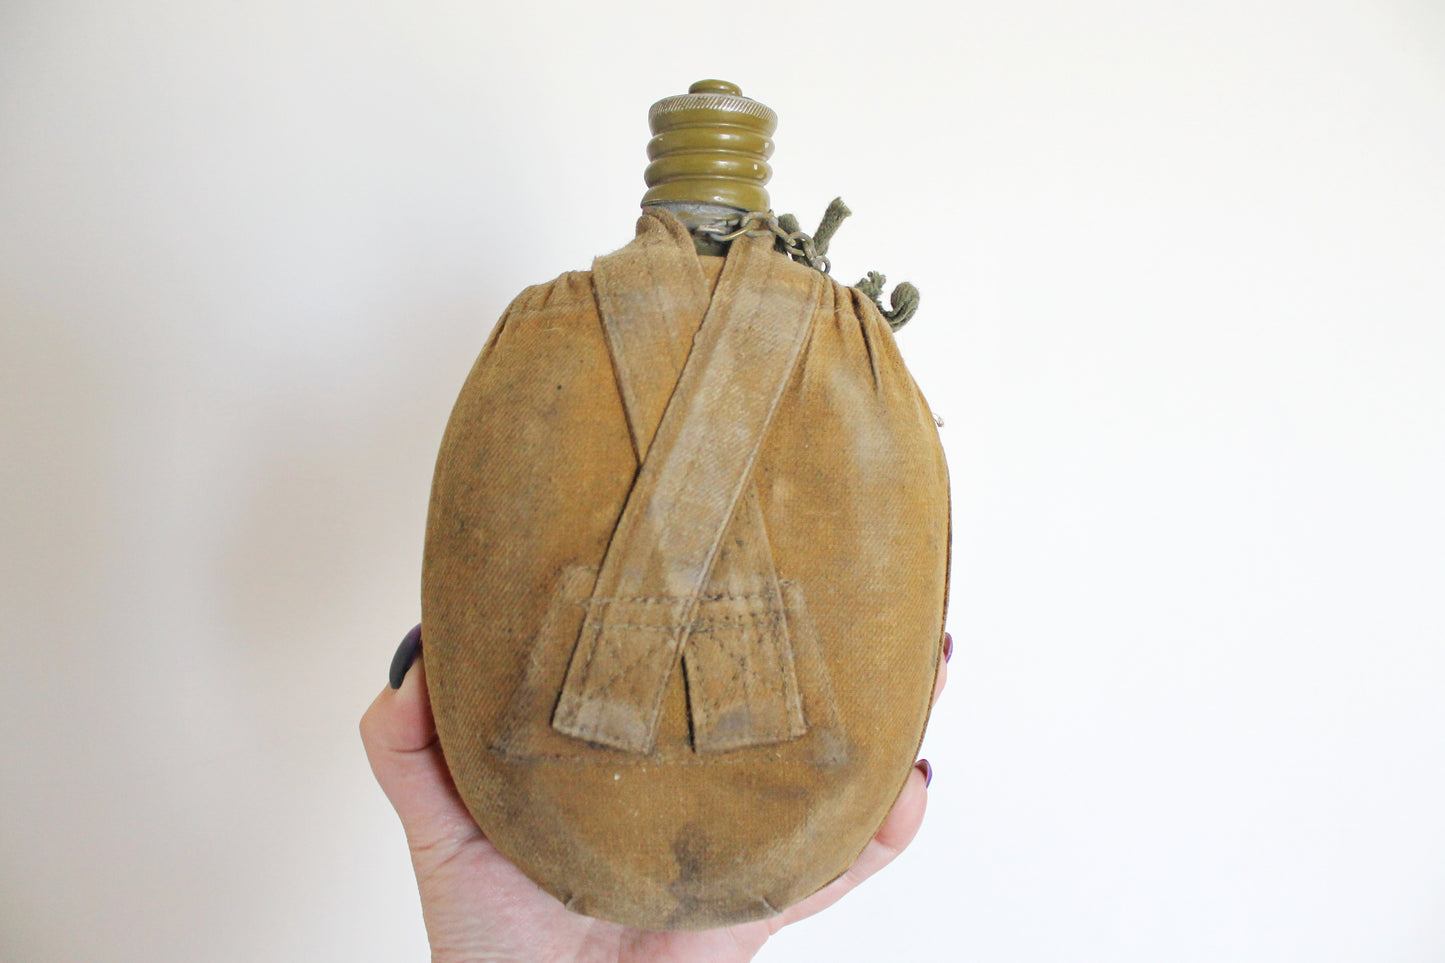 USSR Soldier's Canteen - Flask for Water - Army flask - Bottle with Cover Pouch - 1970s